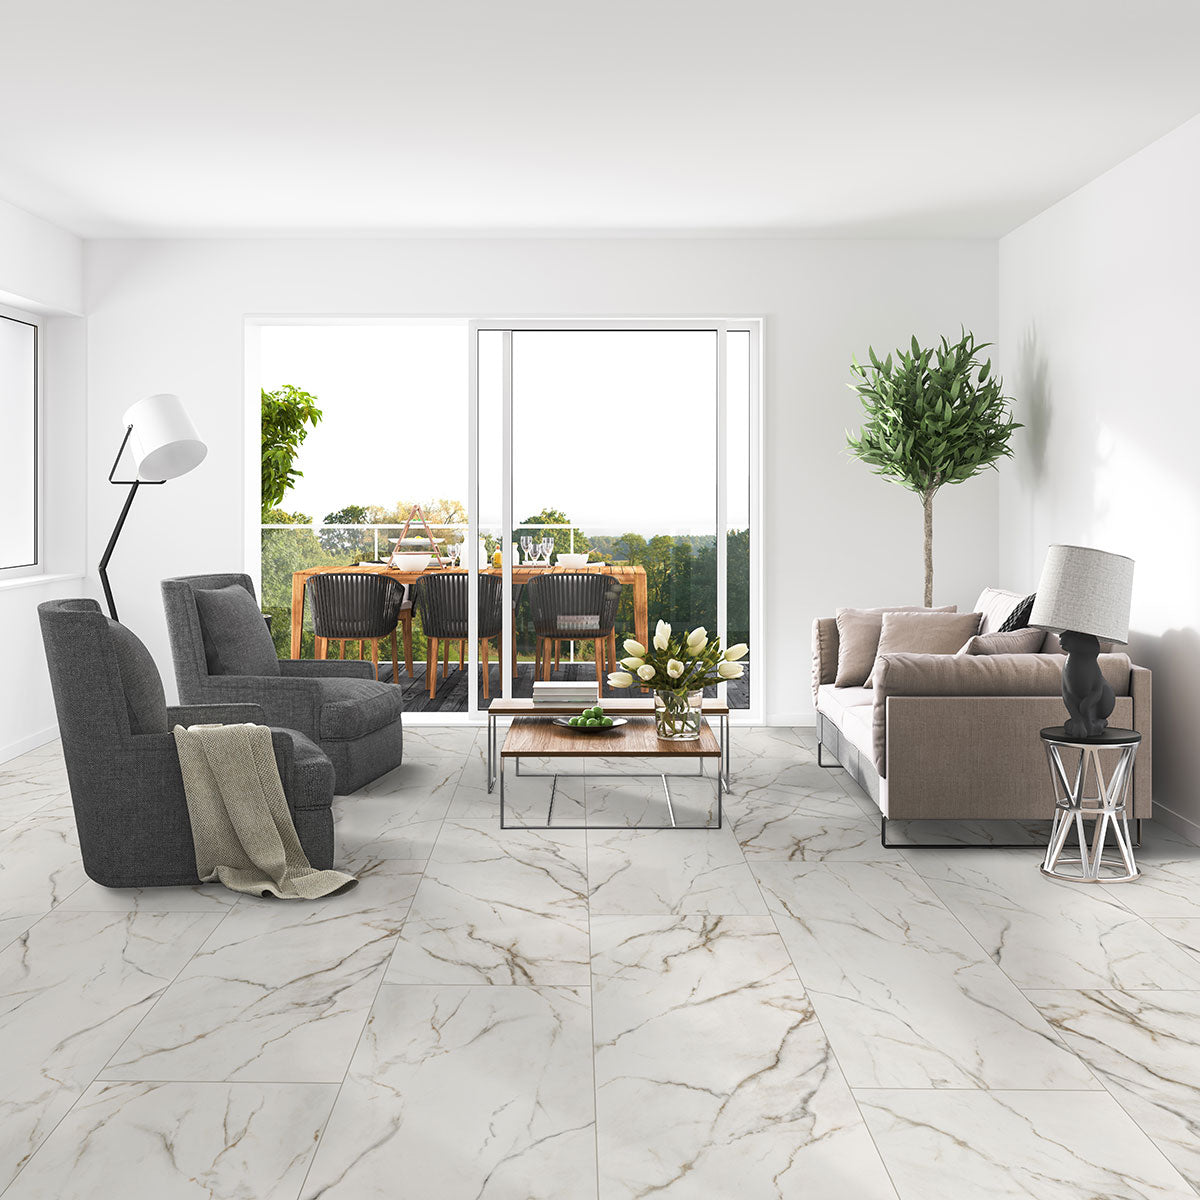 MSI - Kaya 24 in. x 48 in. Porcelain Tile - Calacatta Lucca Polished Installed